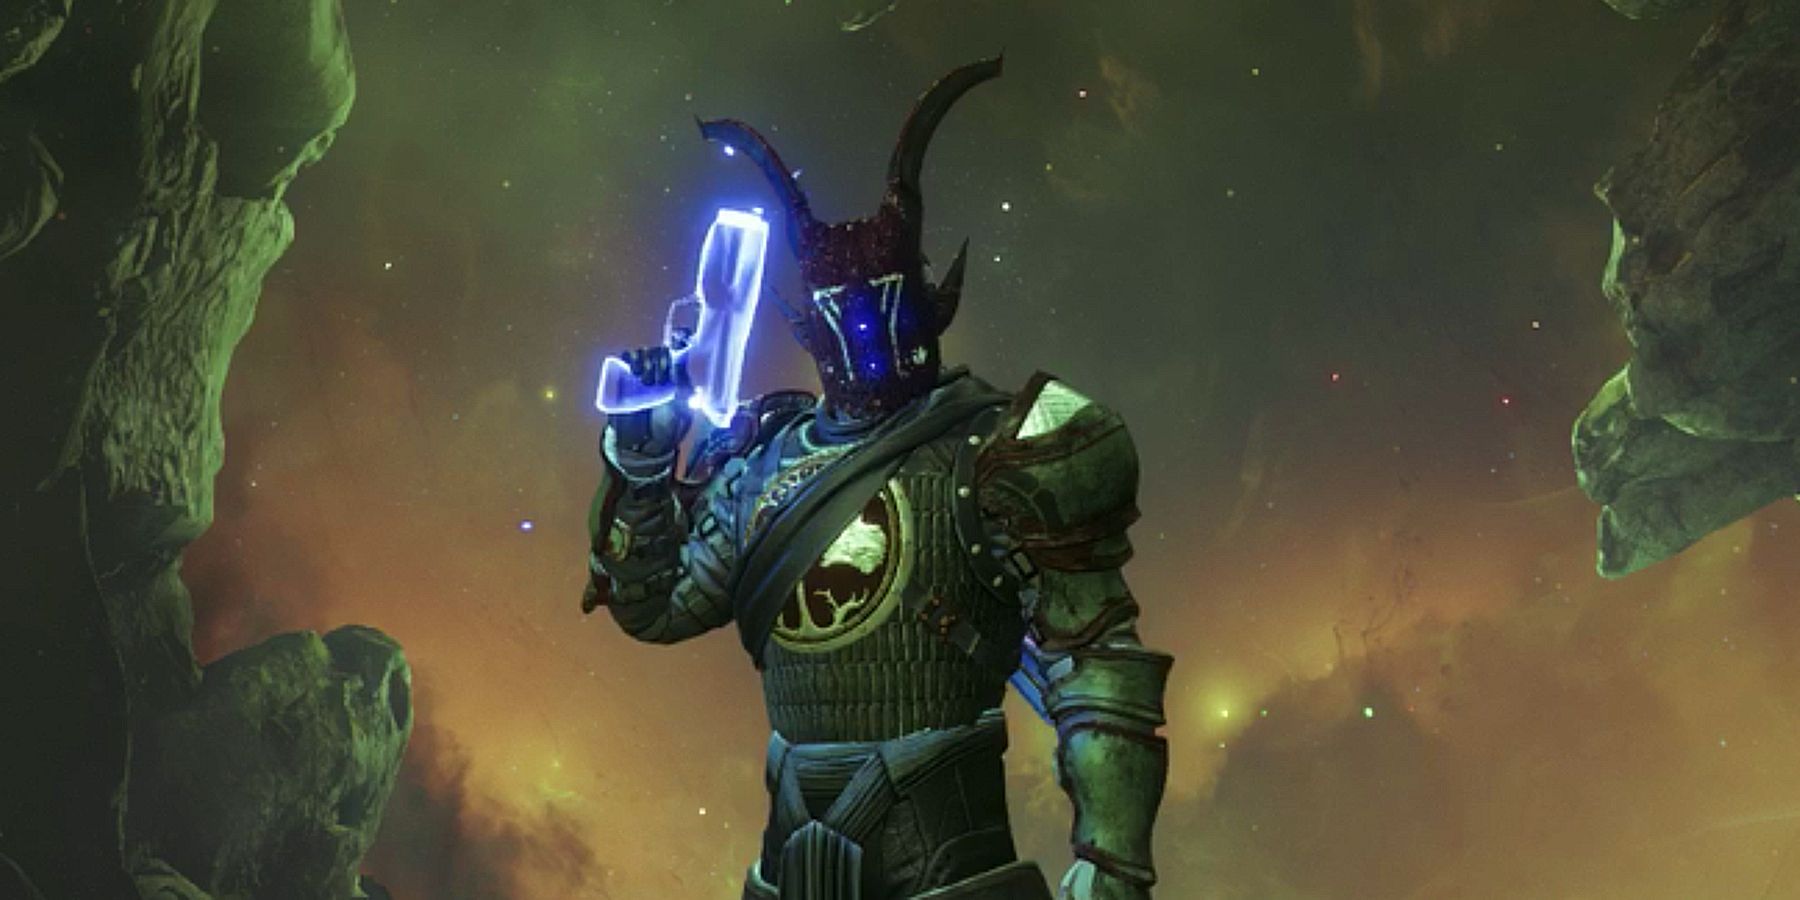 Destiny 2 Emote Ready For Anything Titan wearing Mask of the Quiet One Exotic Helmet